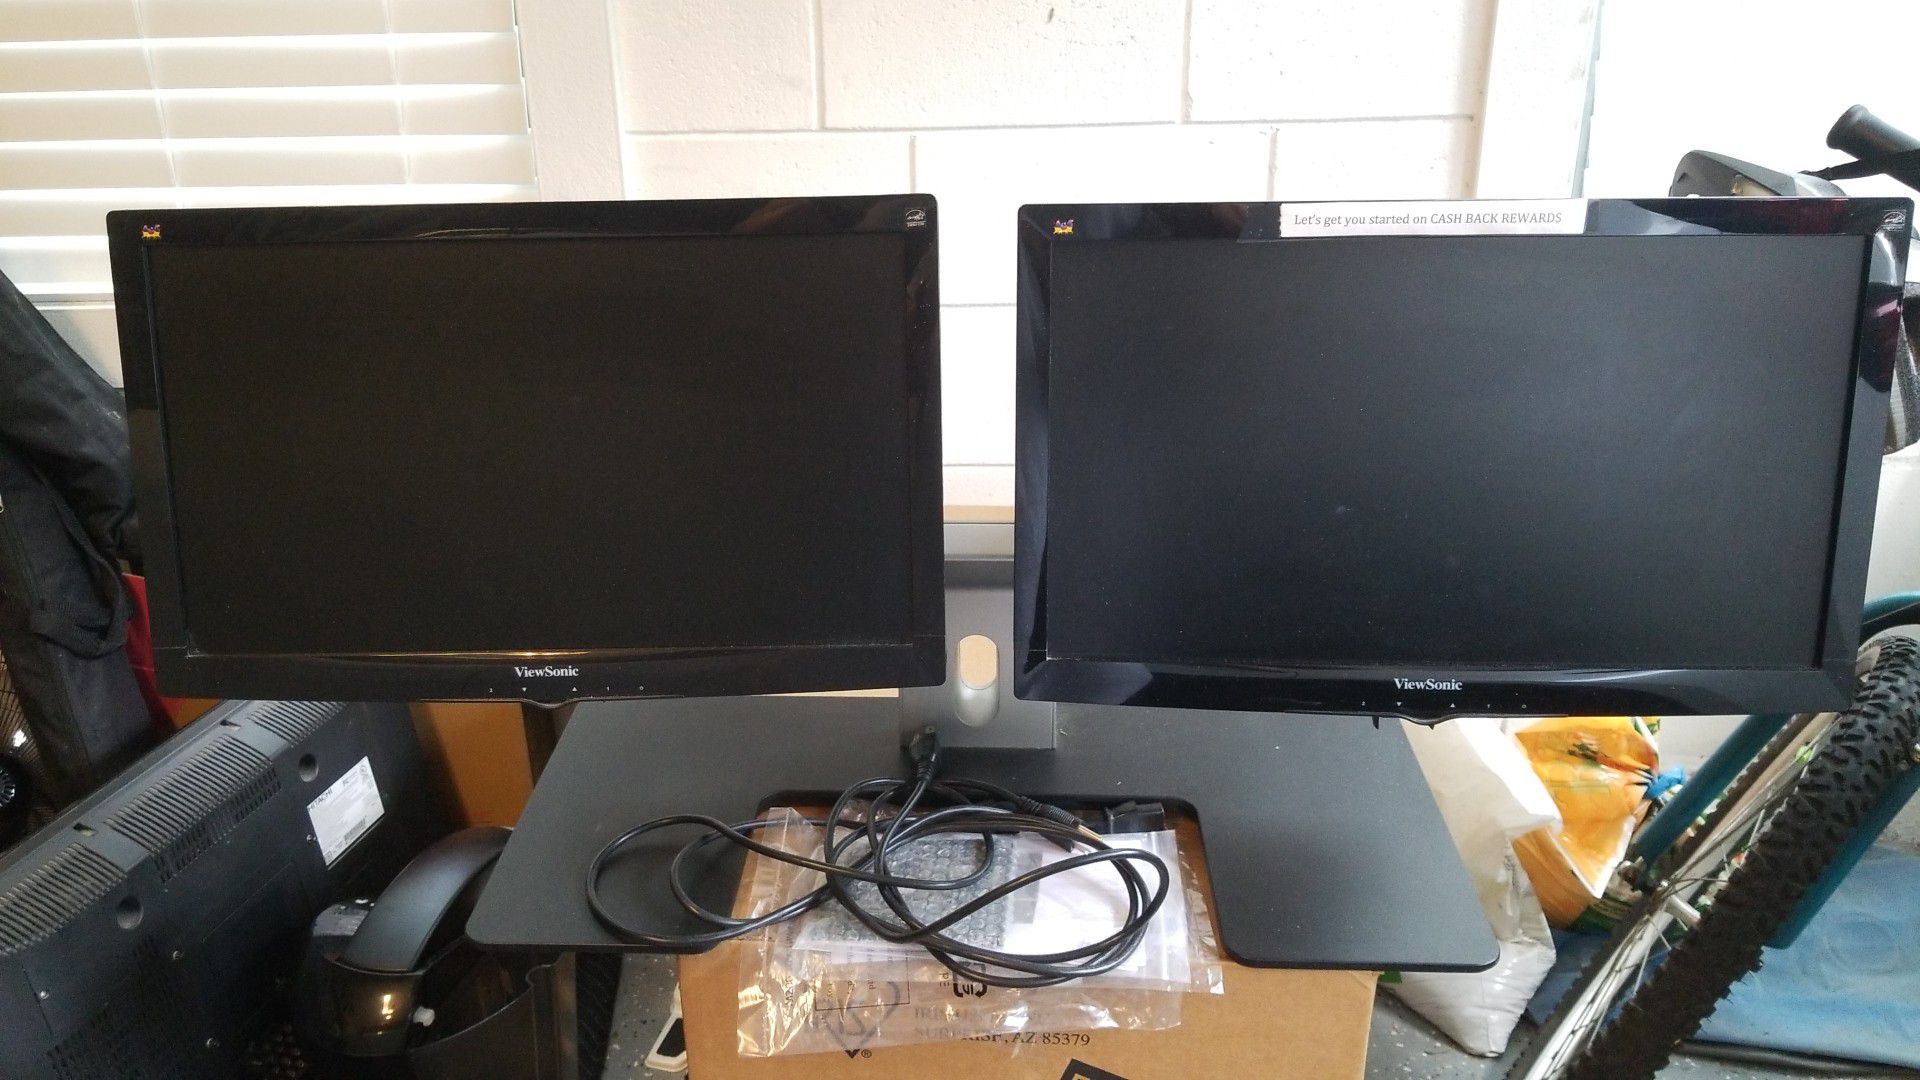 Dell dual stand and 2 15 inch monitors